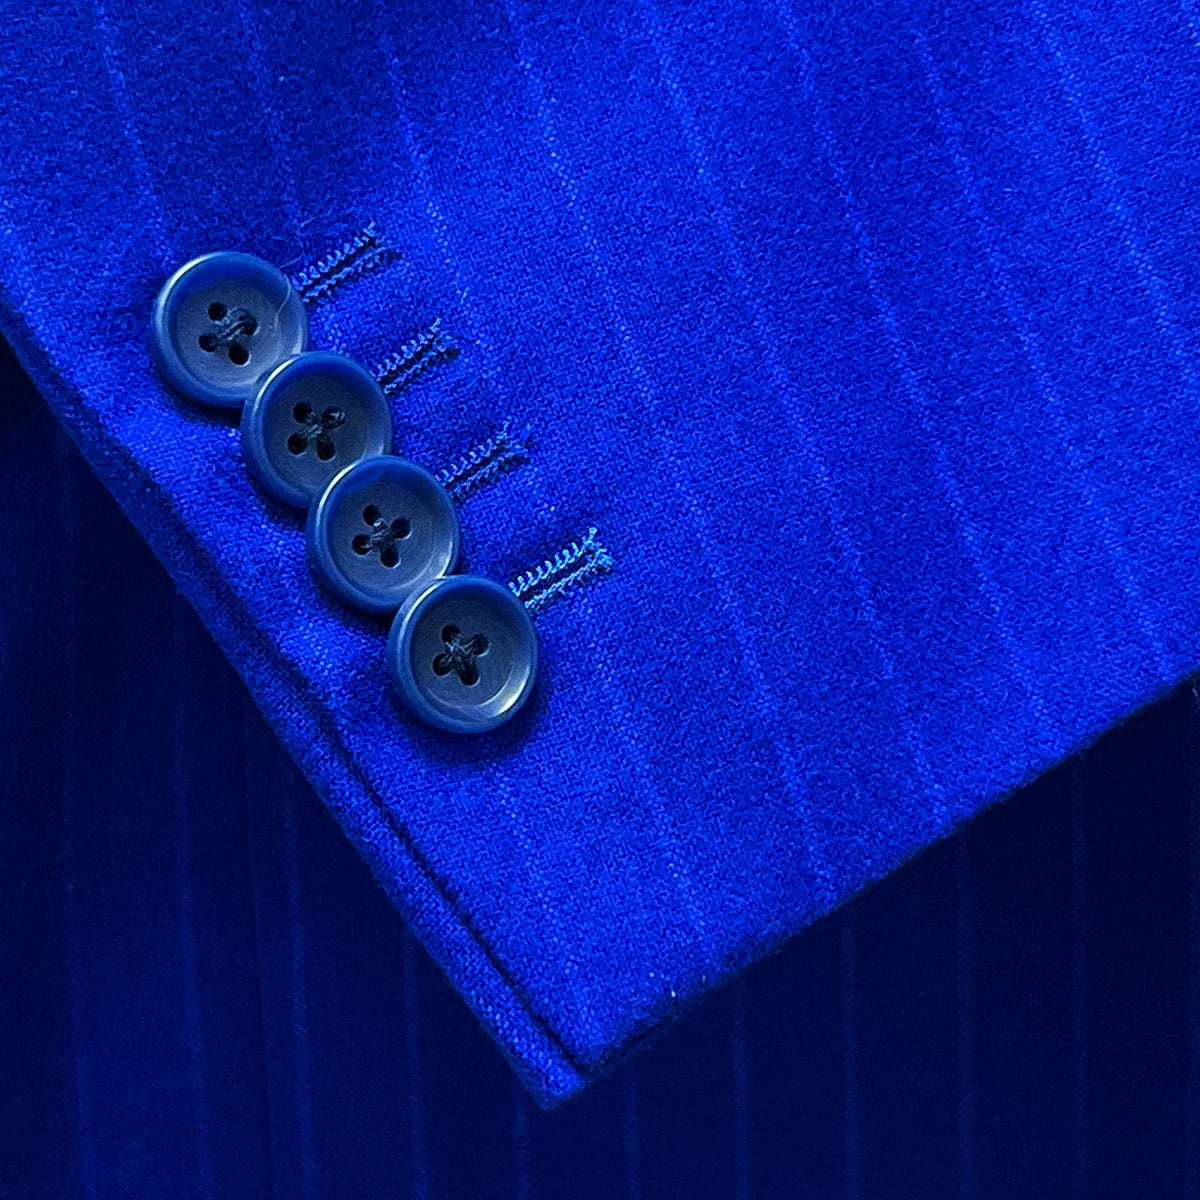 Functional sleeve buttonholes in the royal blue pinstripe suit.